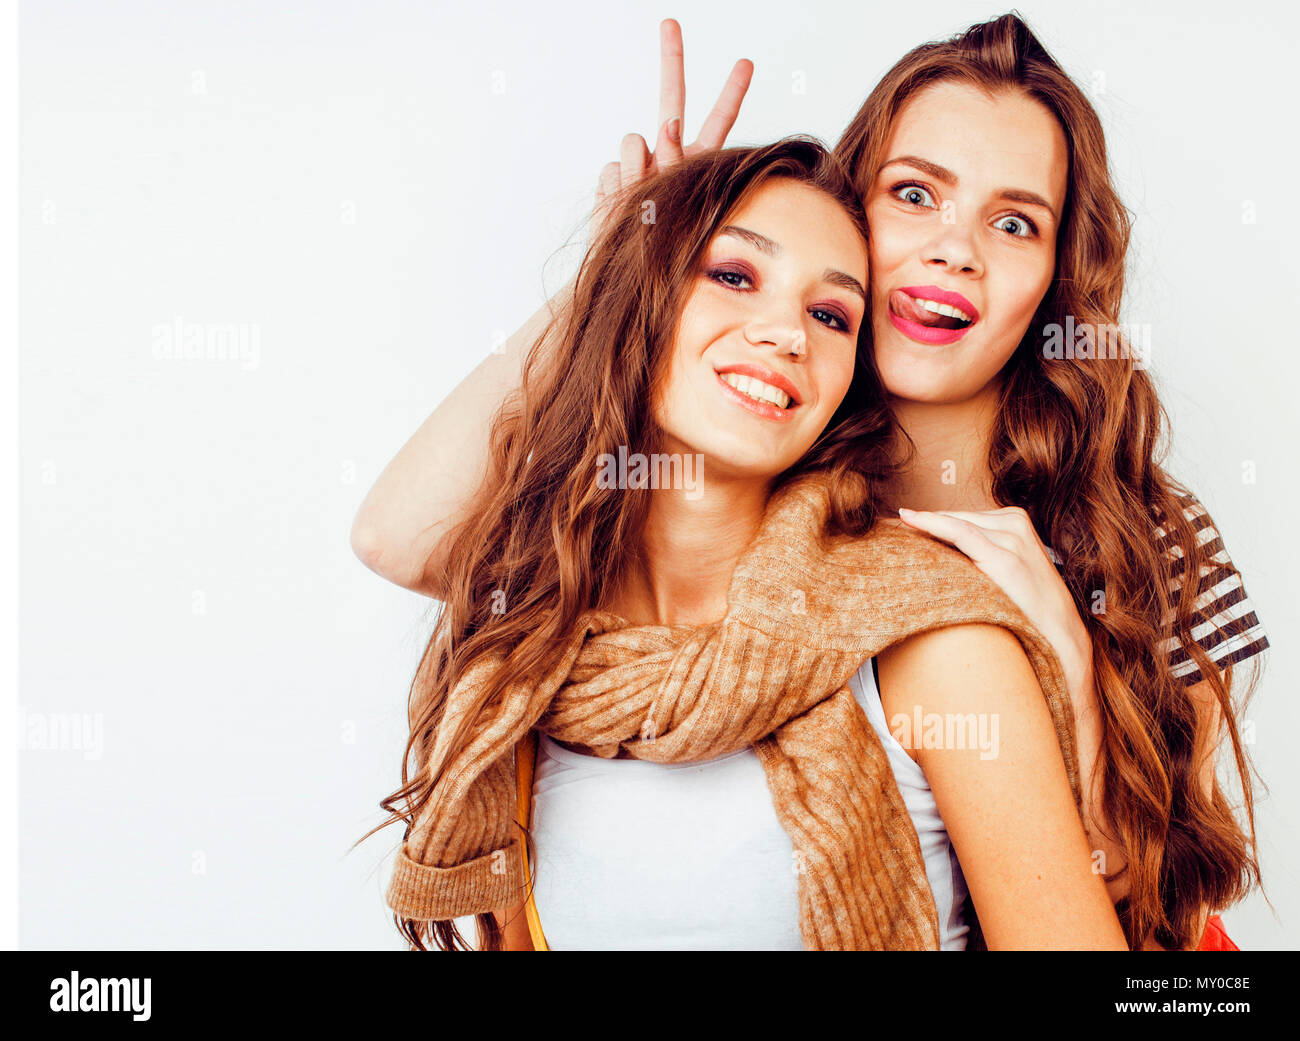 best friend poses | Sisters photoshoot, Friendship photoshoot, Friend  photoshoot